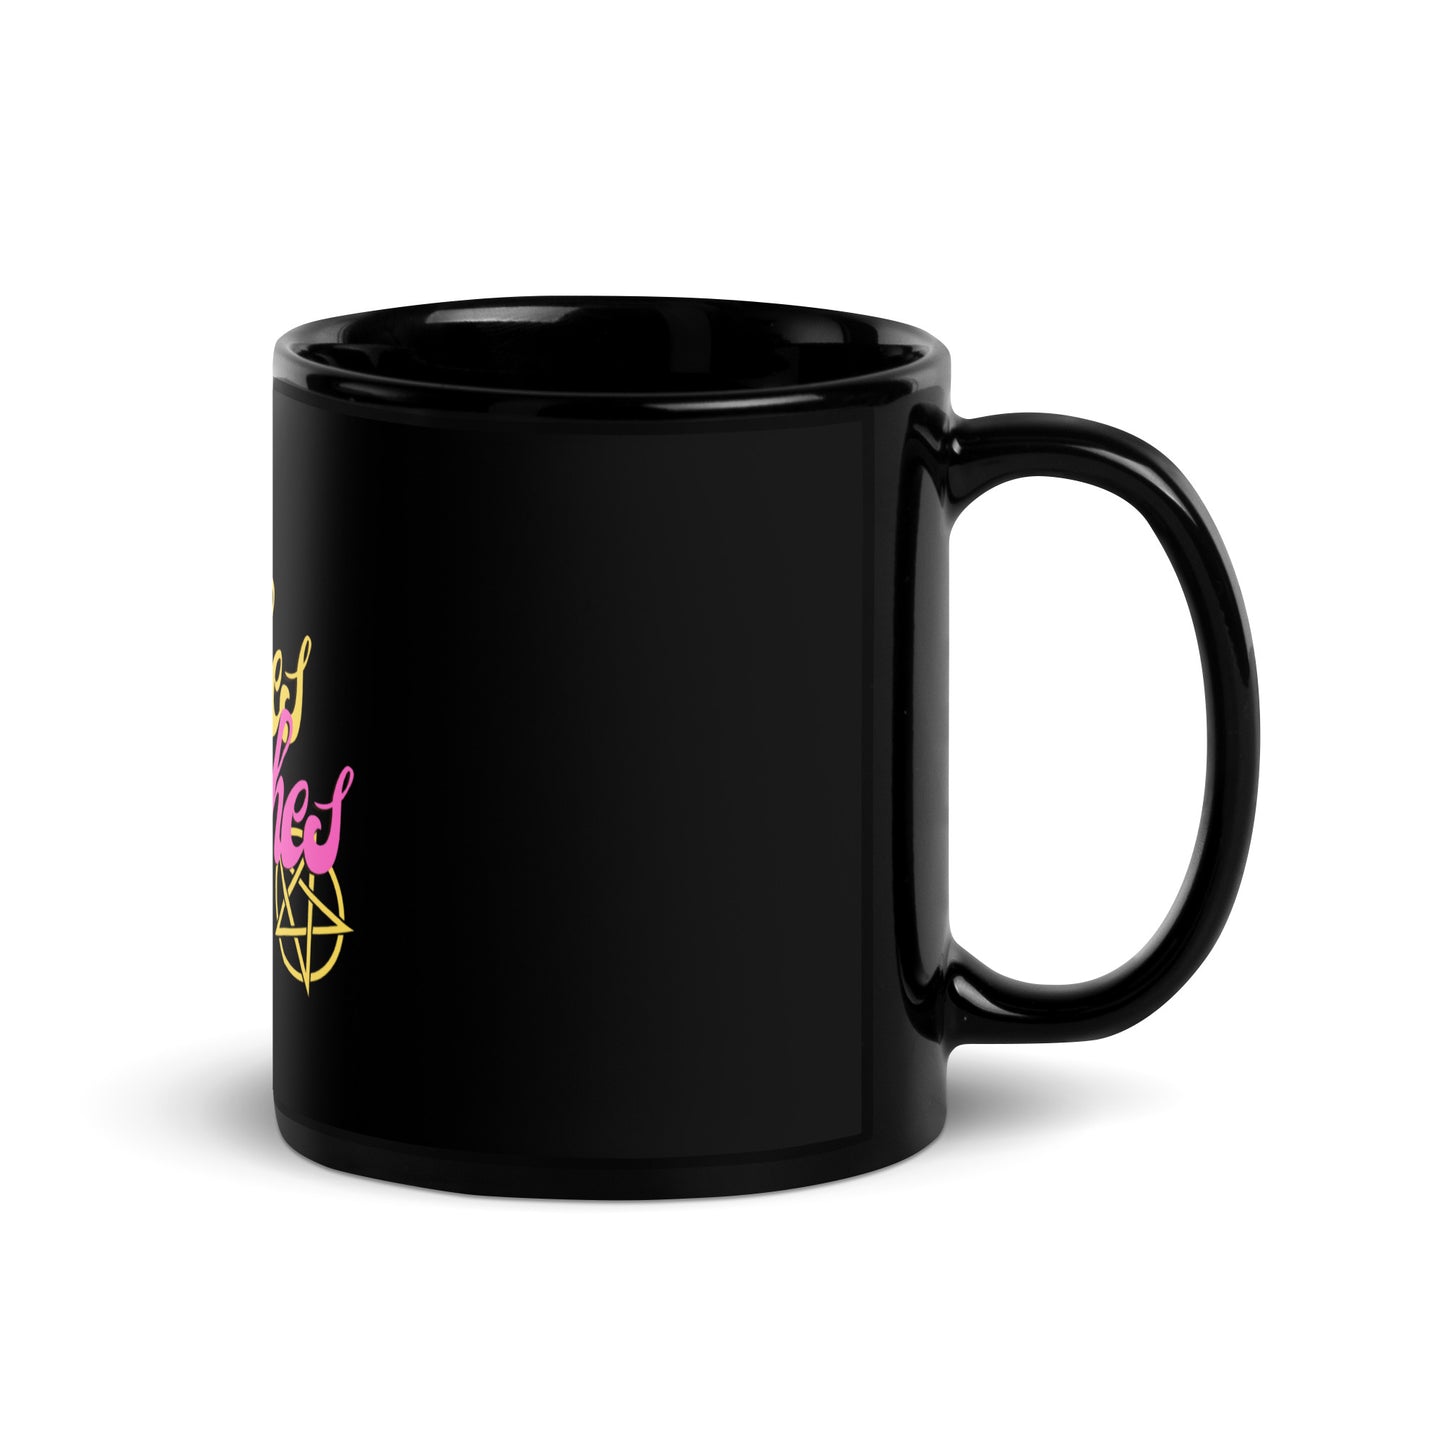 Witches Get Bitches Mug